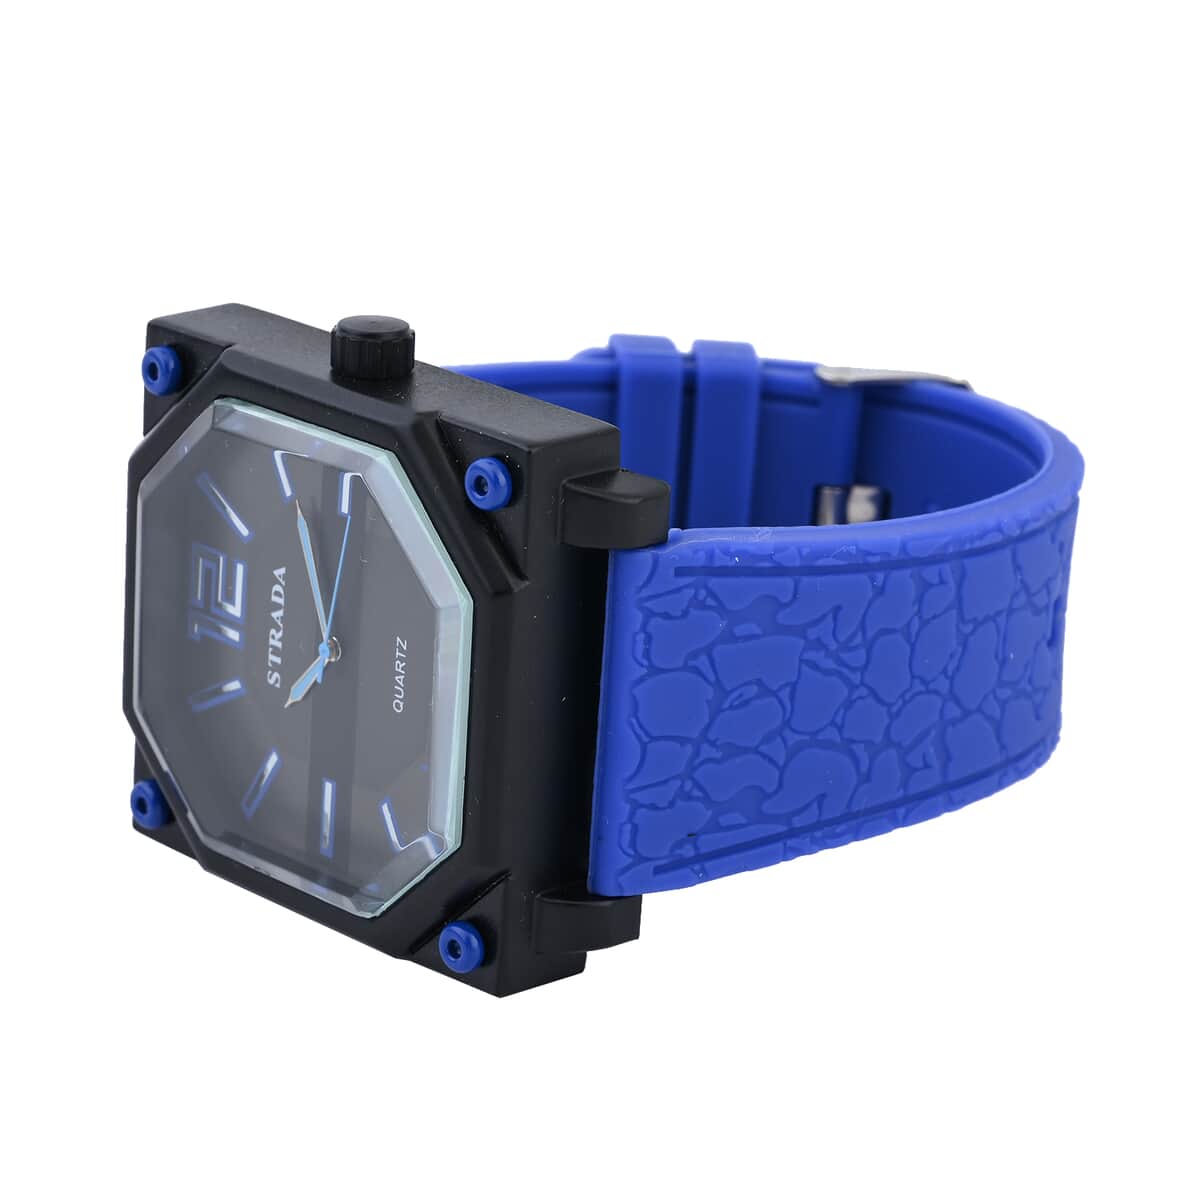 Strada Japanese Movement Octagonal Dial Sports Watch with Blue Silicone Strap image number 3